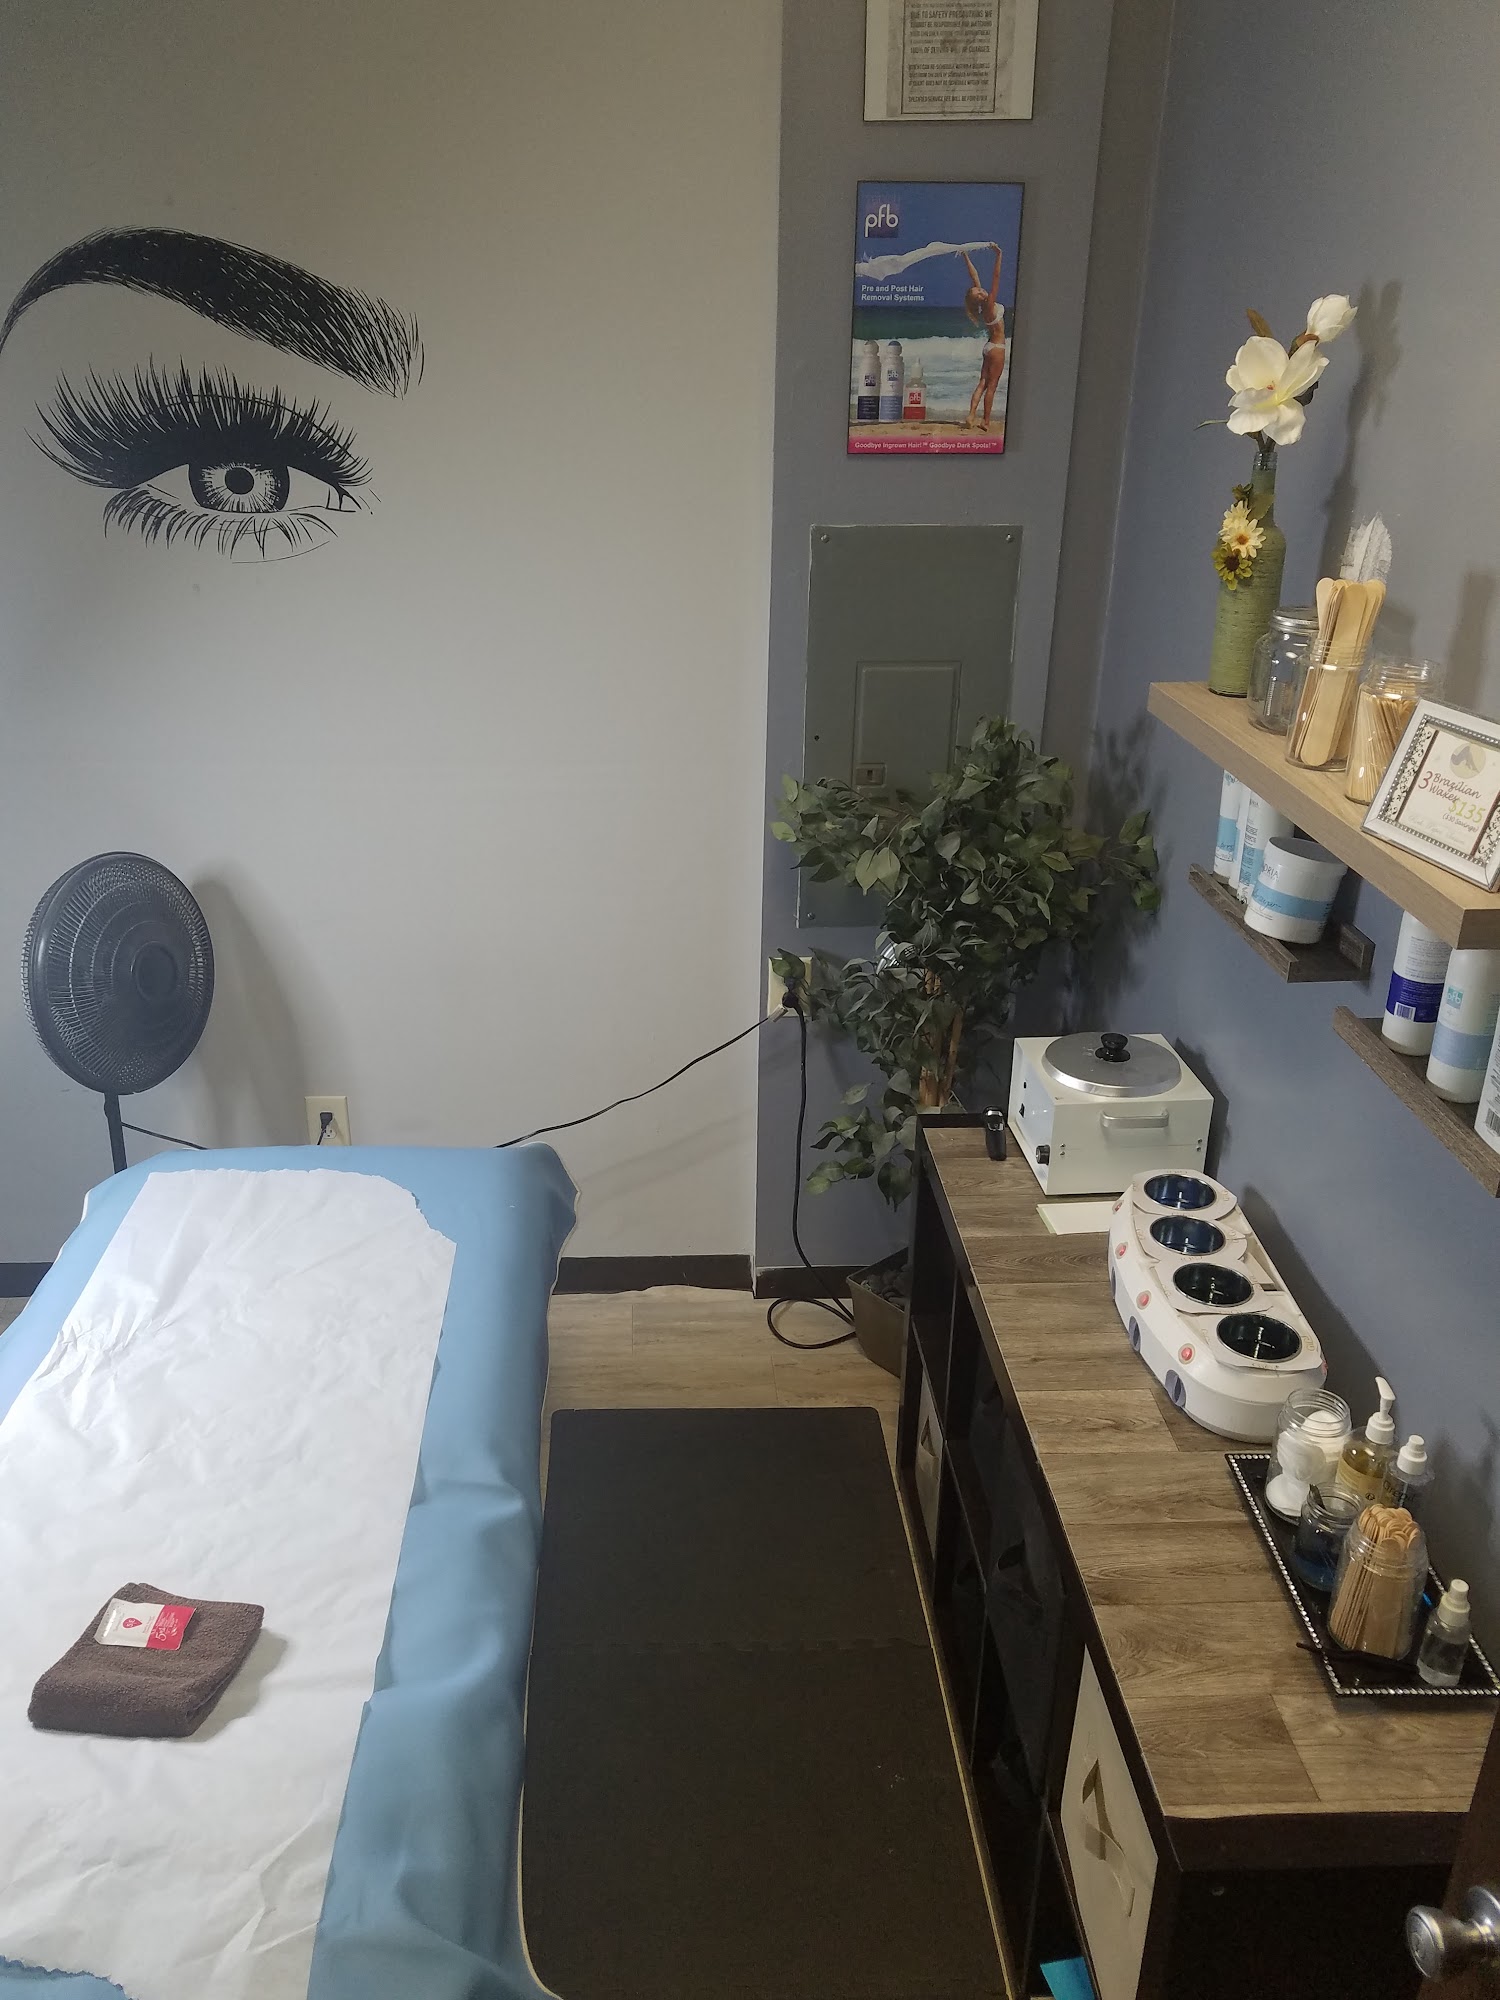 R.P.S Full Body Waxing Boutique